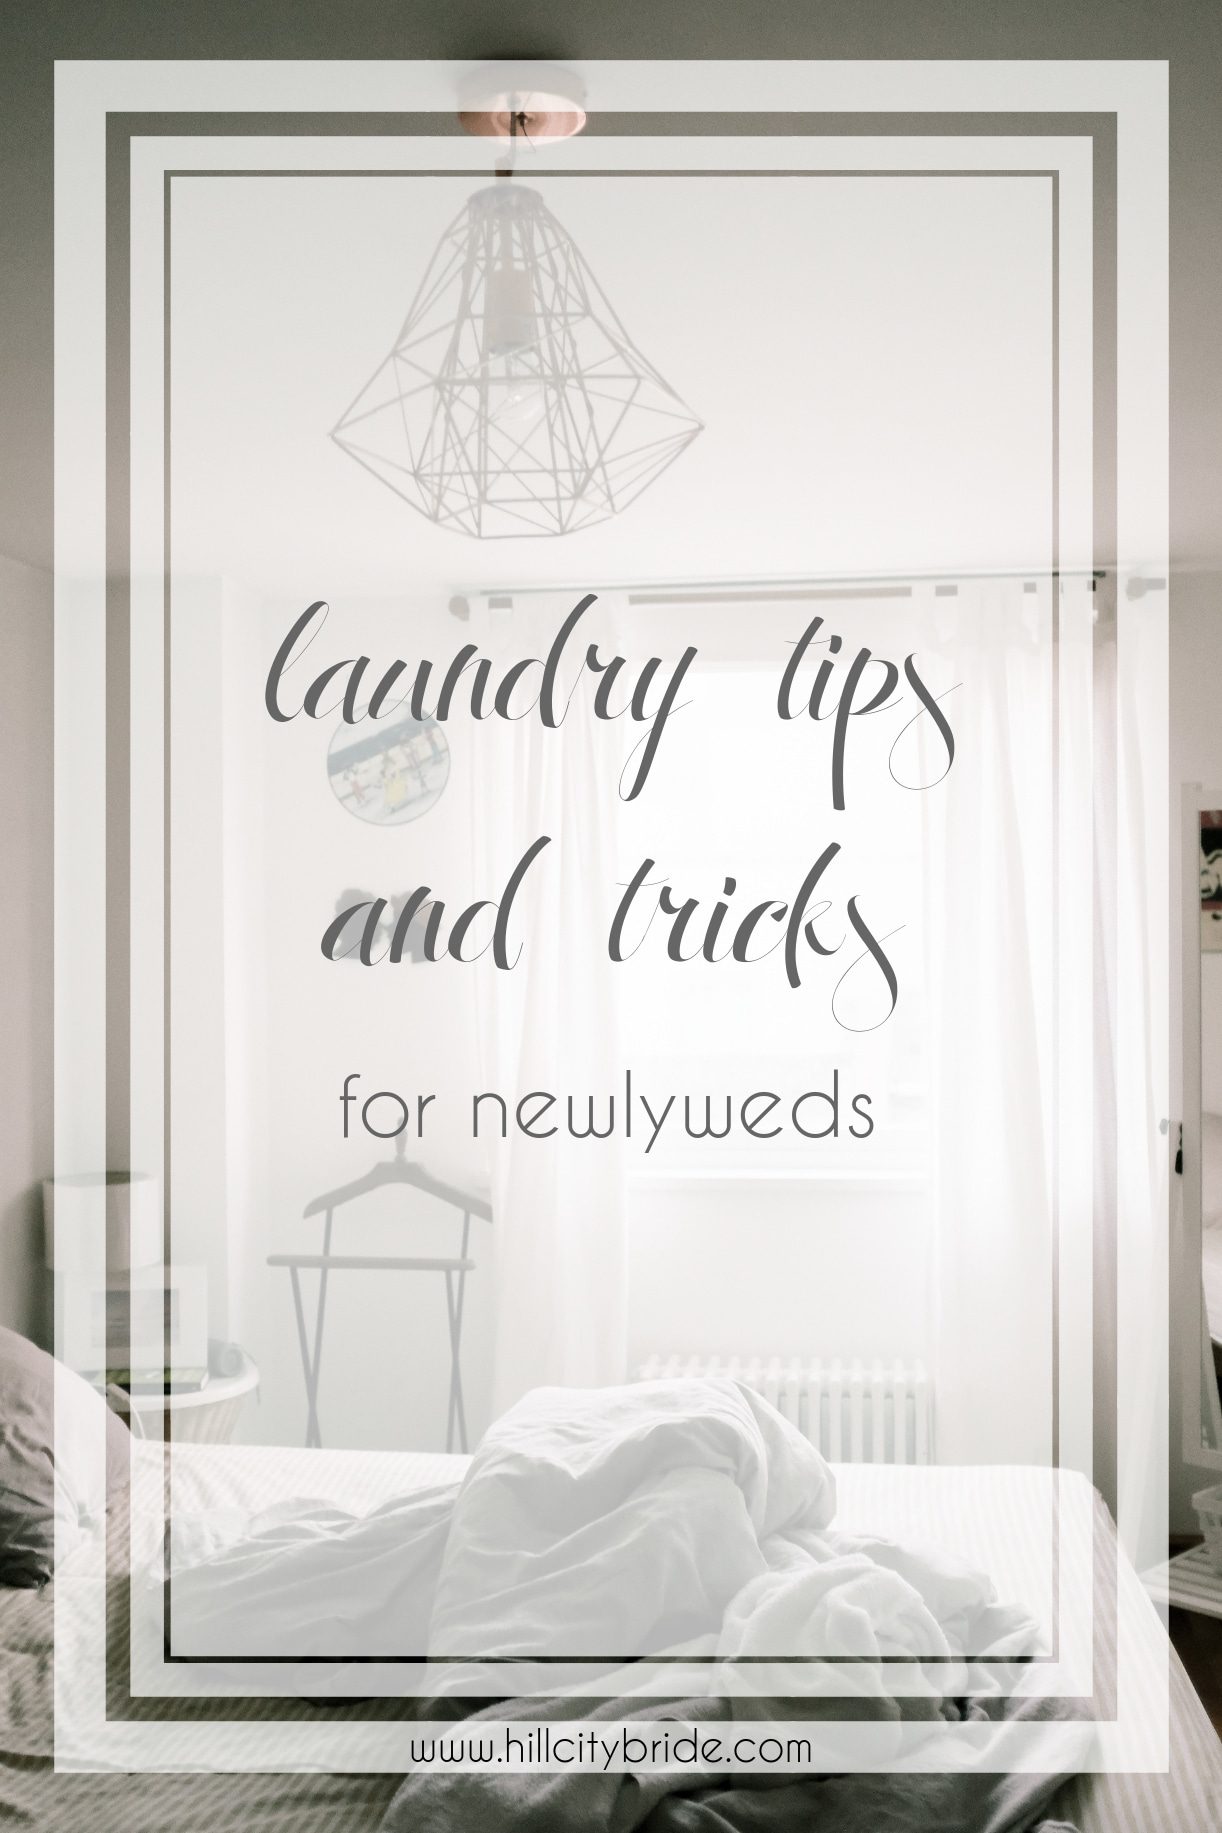 Laundry Tips and Tricks for Newlyweds | Hill City Bride Virginia Weddings Blog Wedding